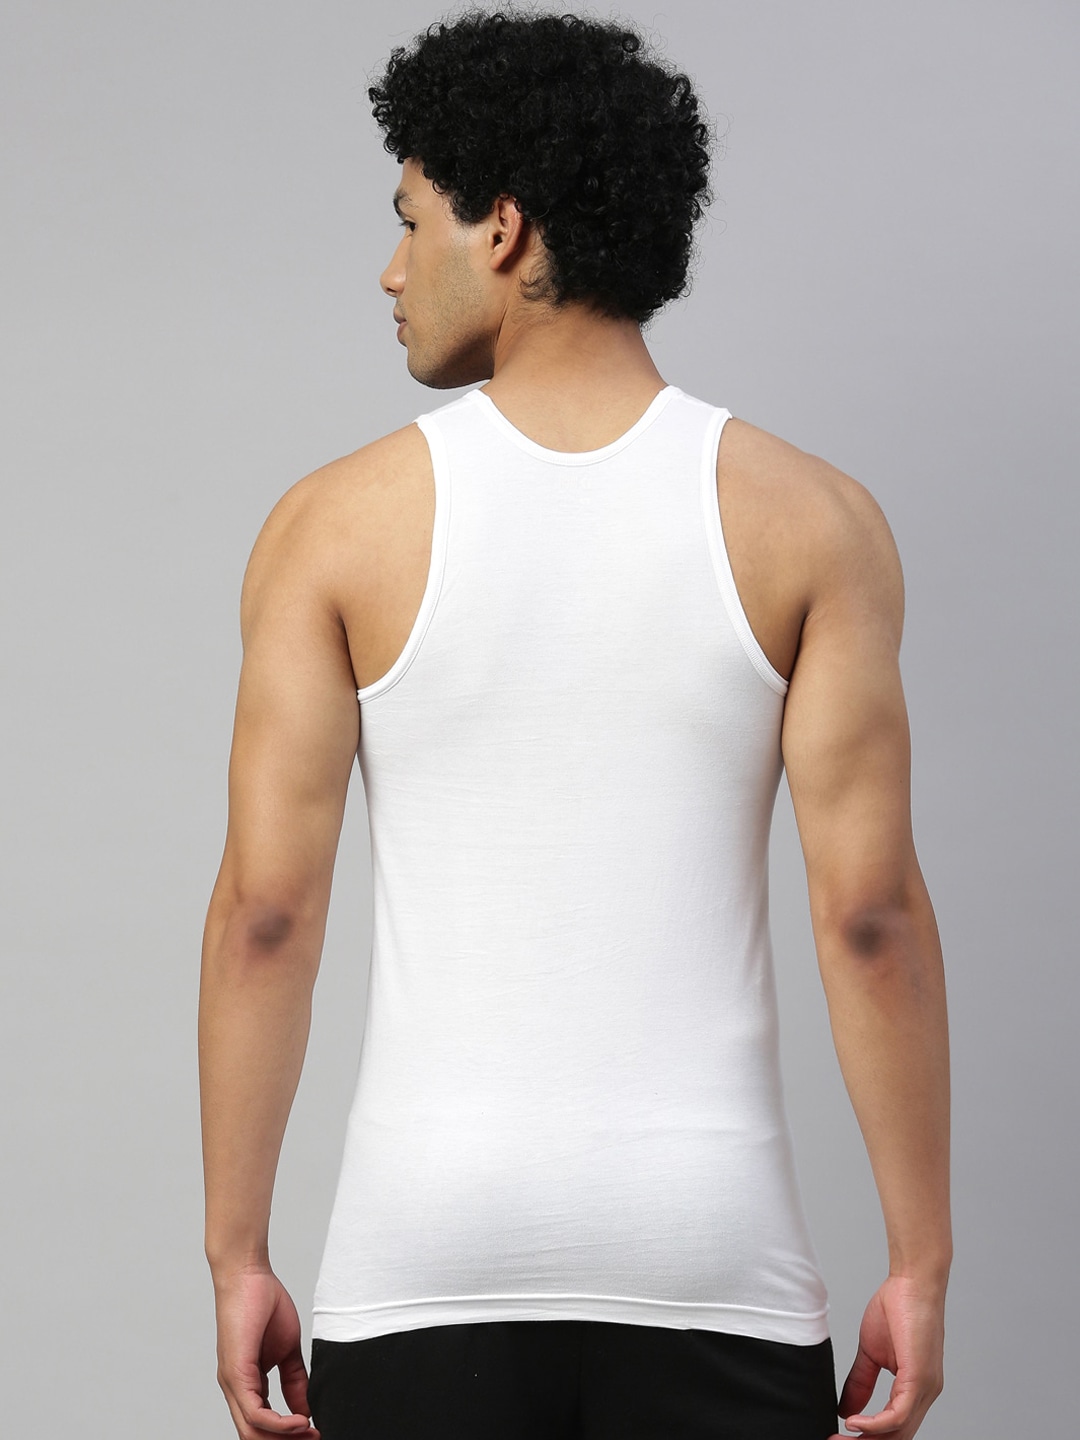 Clothing Innerwear Vests | DIXCY SCOTT MAXIMUS Men Pack Of 2 White Pure Cotton Gym Vest - CP85349